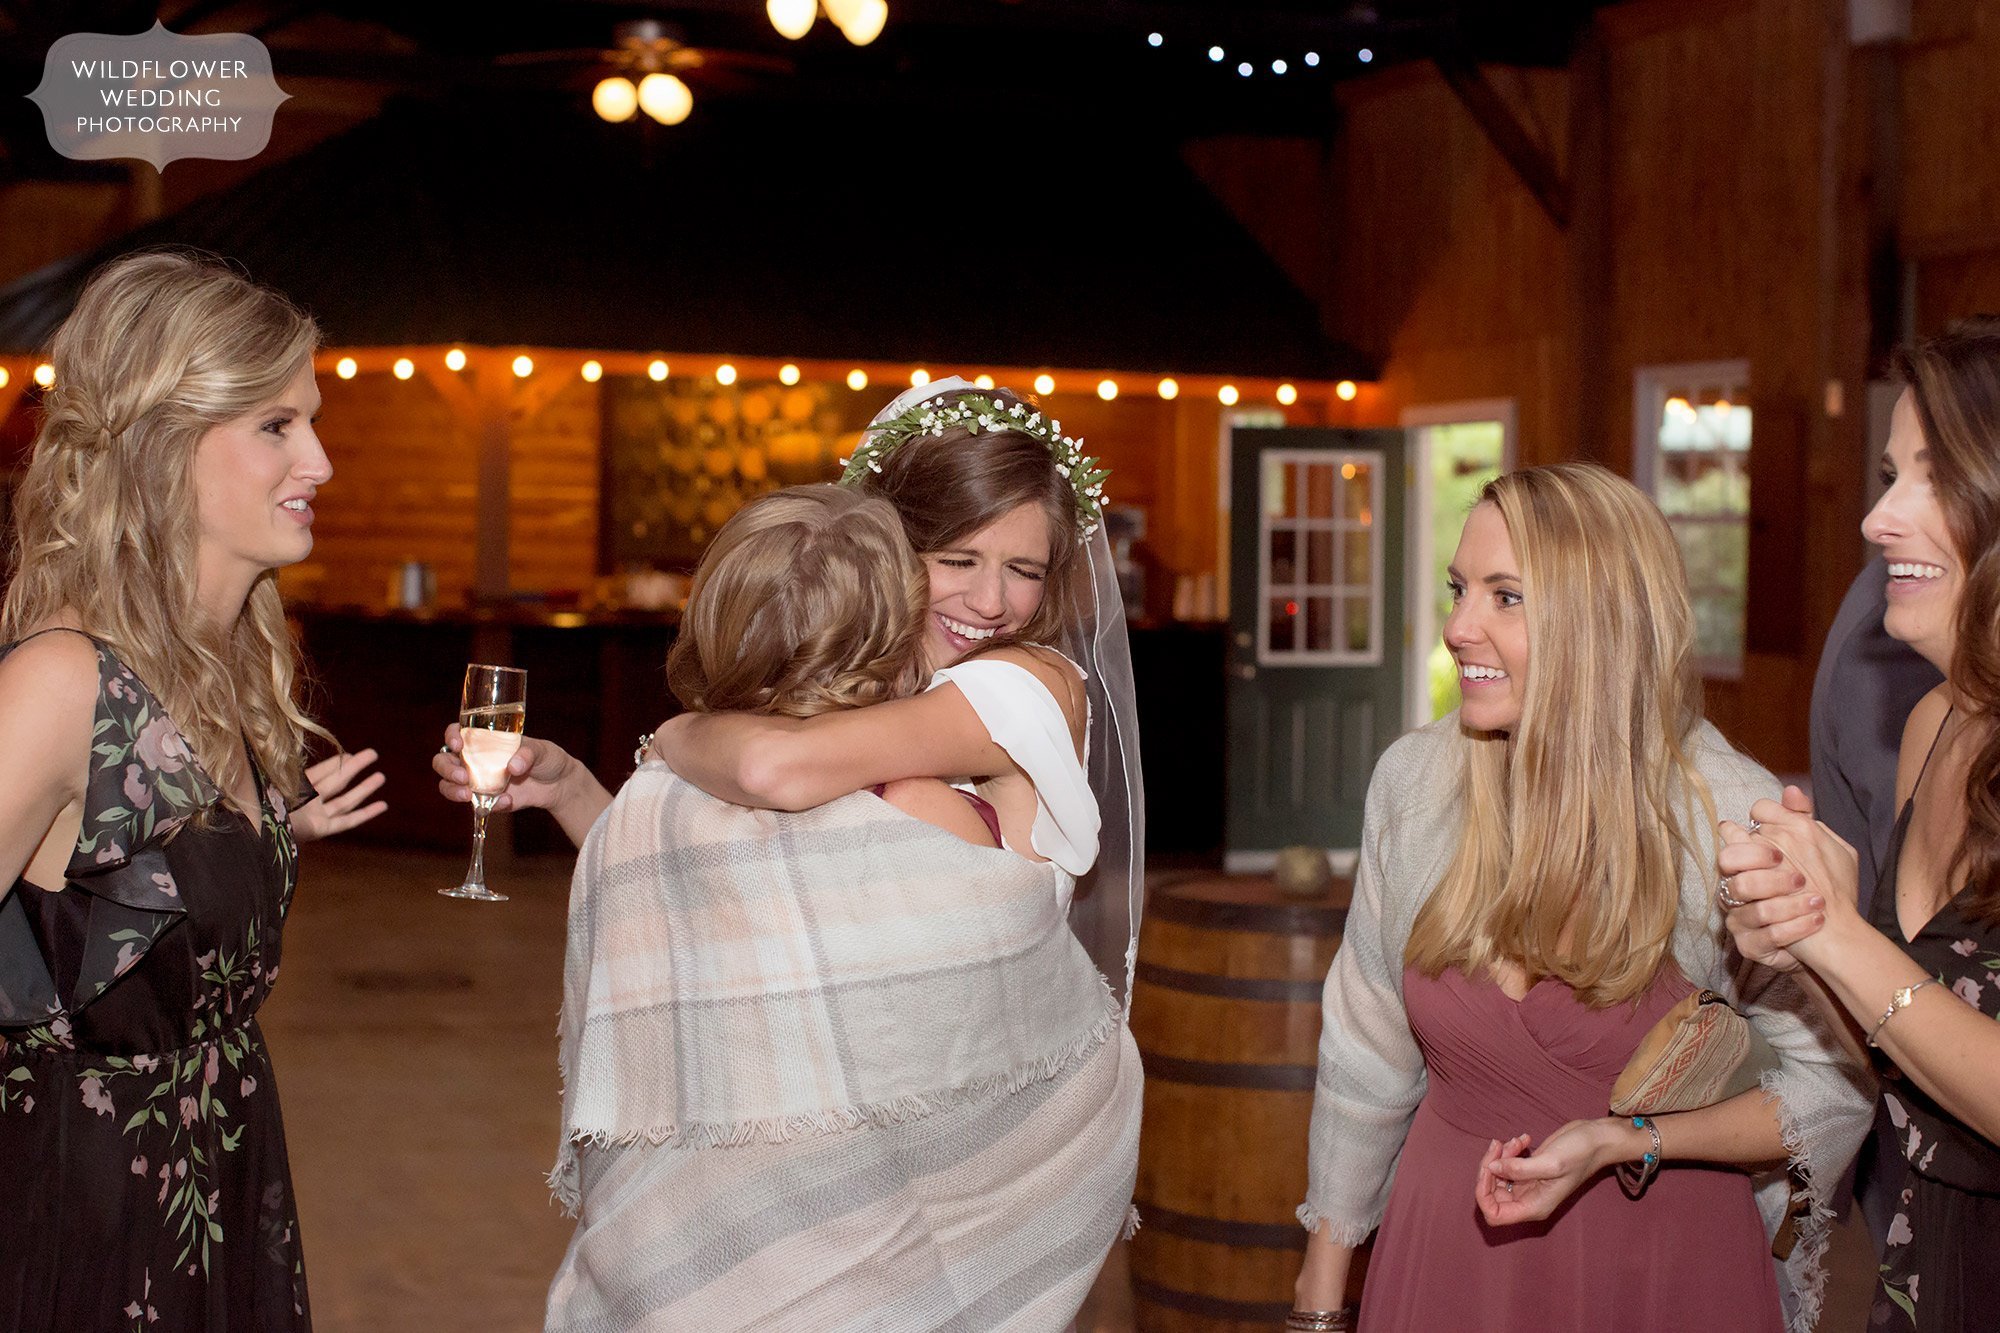 The bride hugs wedding guest at this outdoor Little Piney Lodge reception.